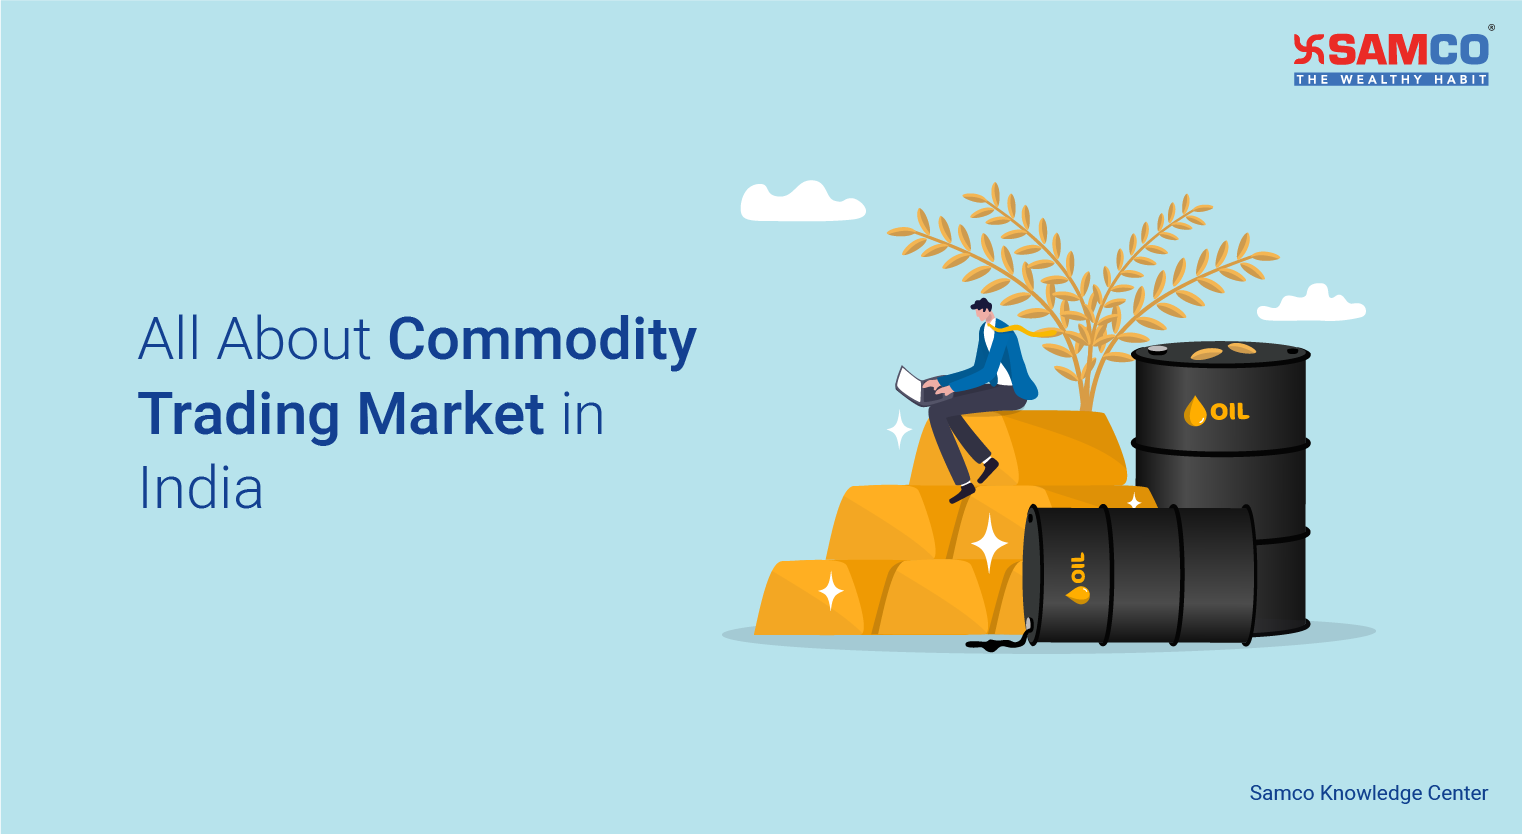 All About Commodity Trading Market in India